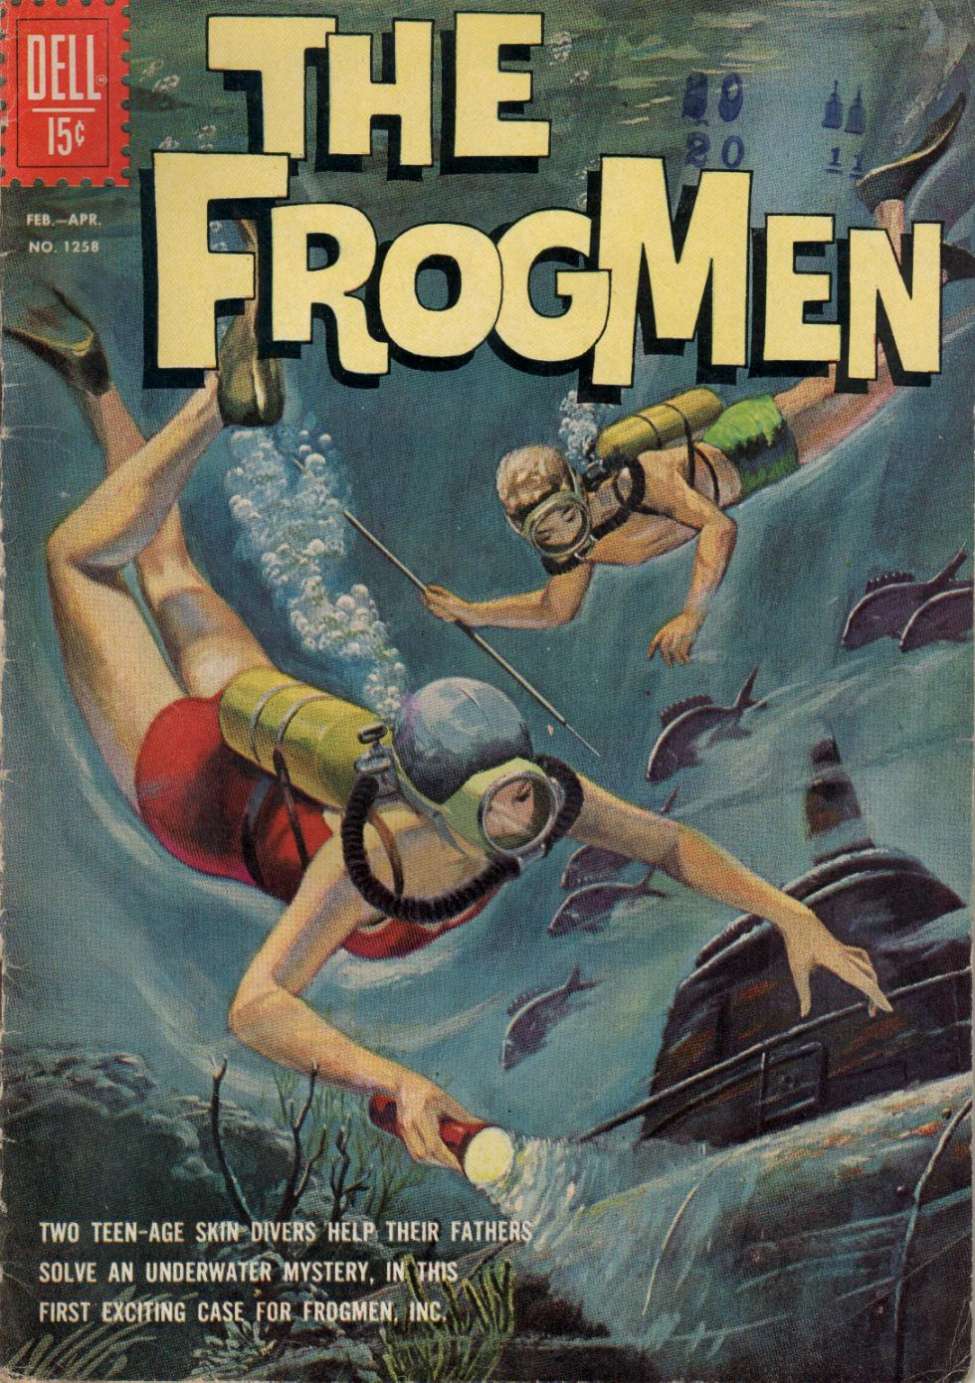 Book Cover For 1258 - Frogmen